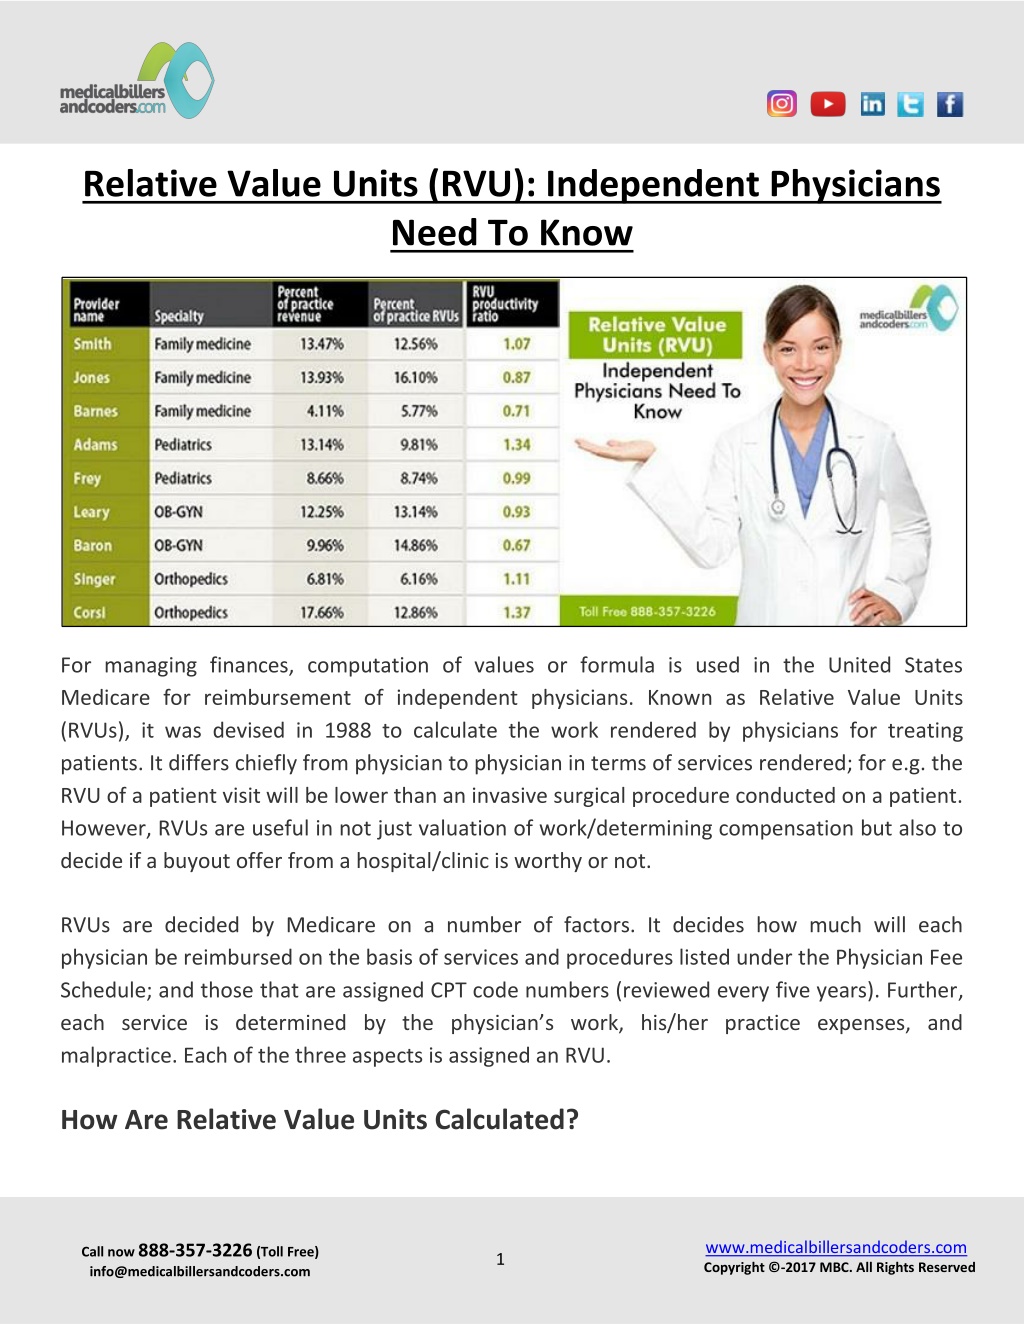 PPT Relative Value Units (RVU) Independent Physicians Need To Know